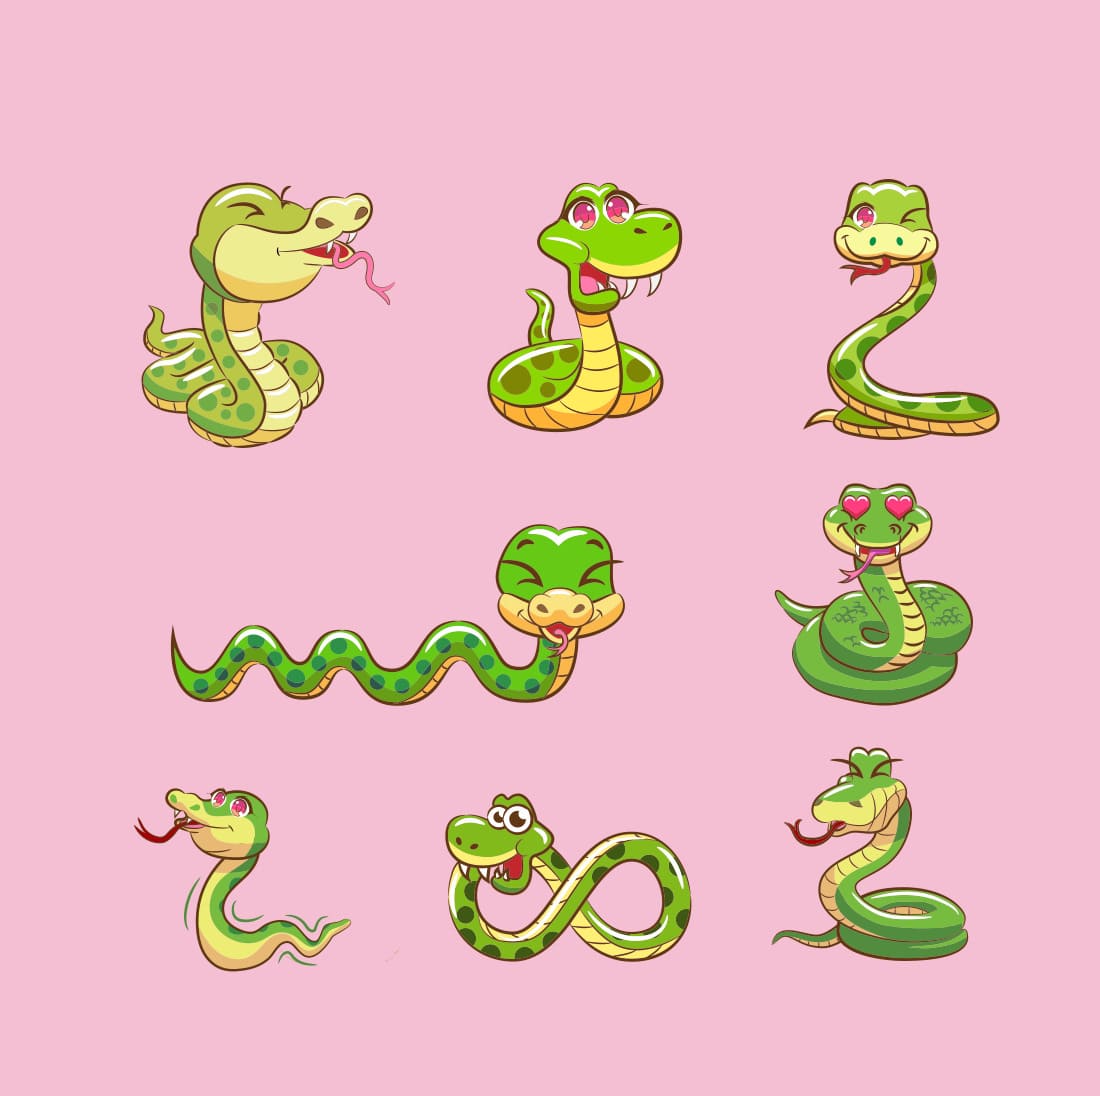 Snake SVG free bundle, second picture 1100x1100.